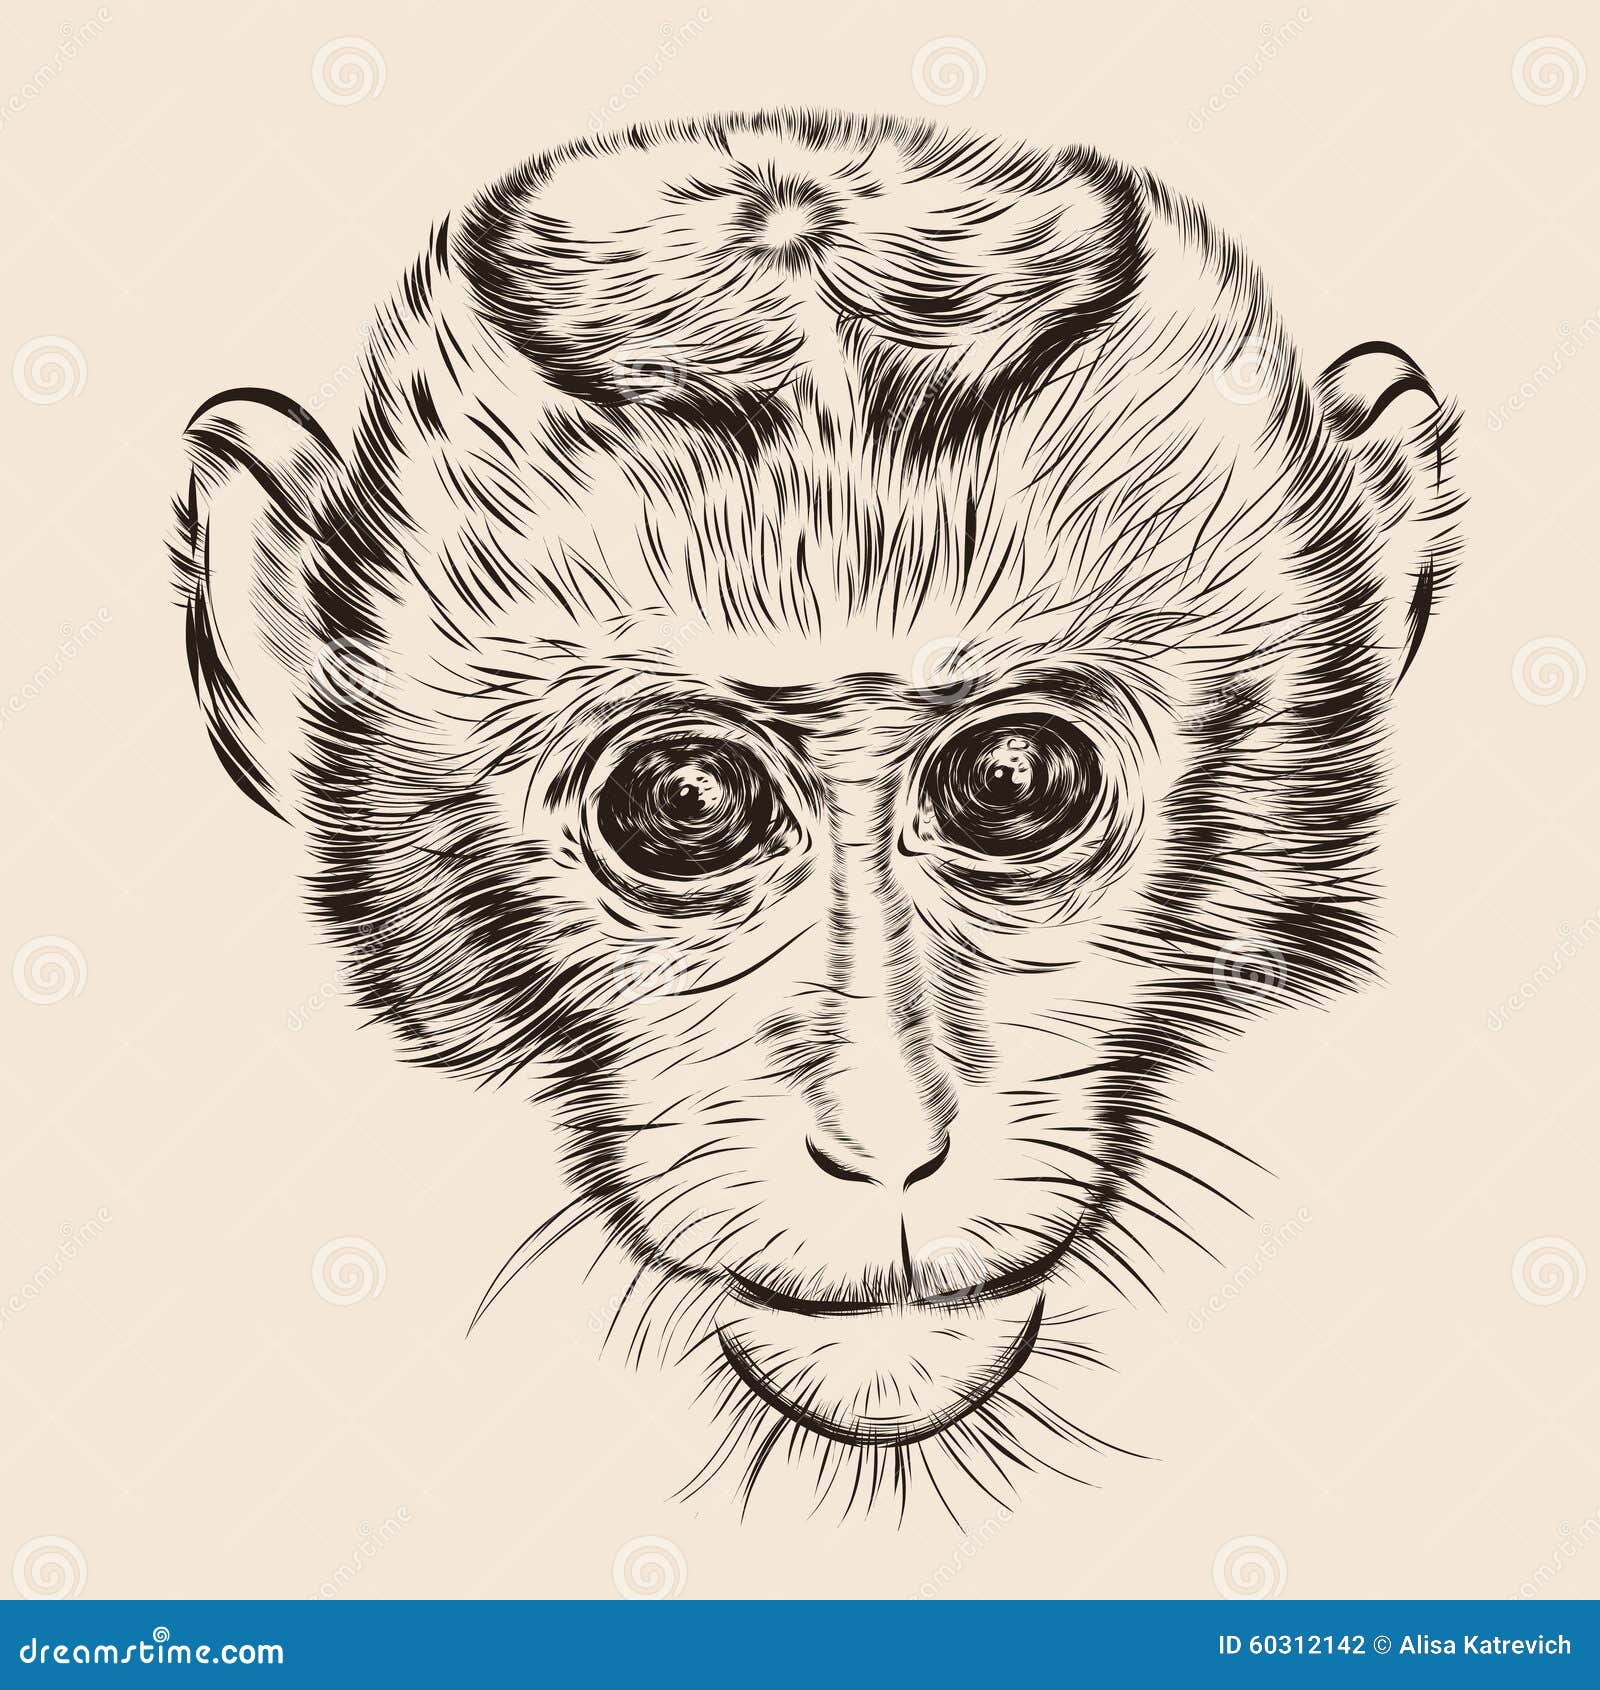 Monkey face sketch hand drawn in doodle style Vector Image